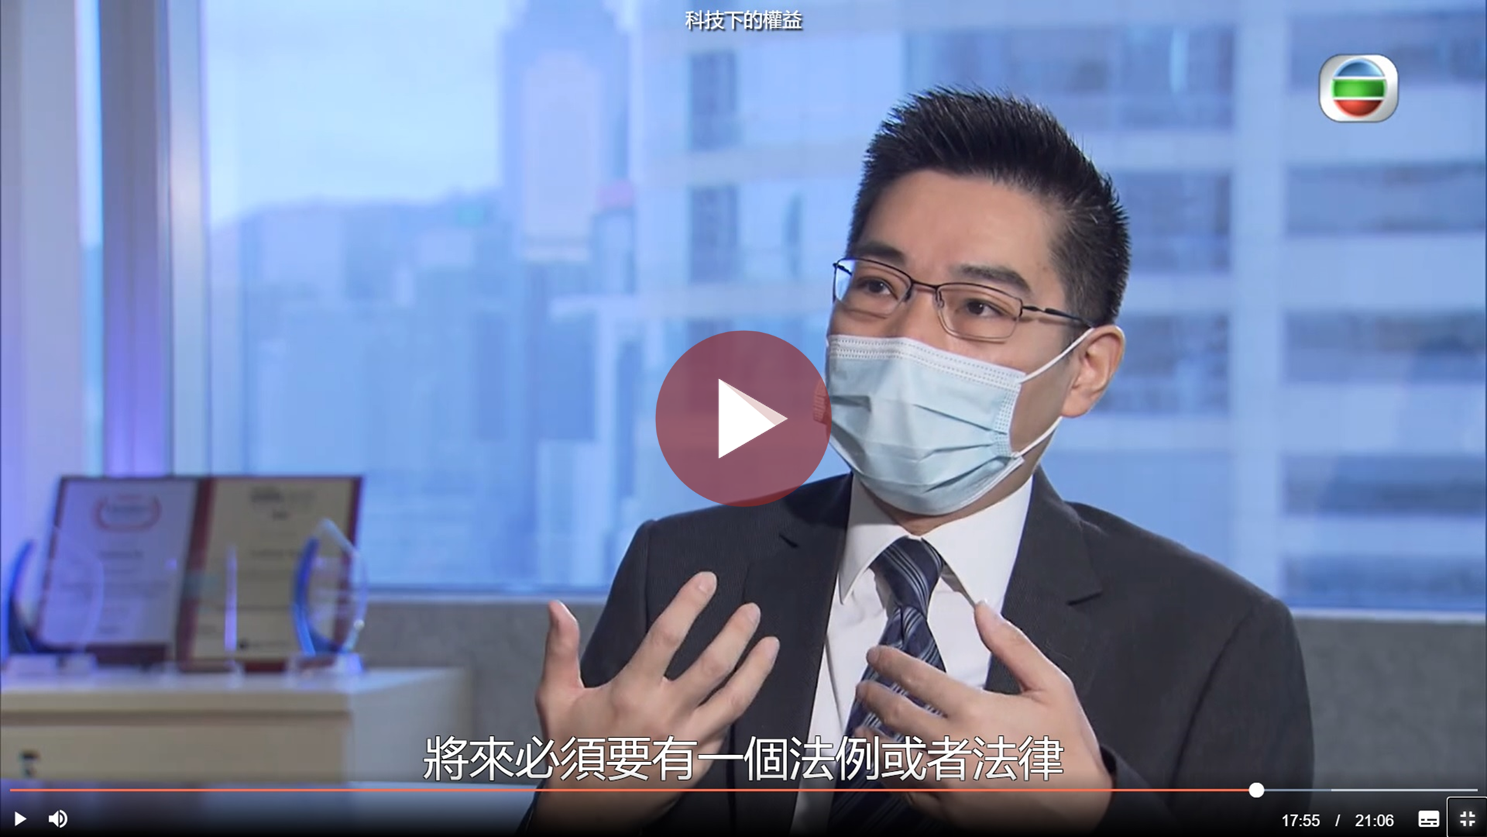 Mr Ray Lee was interviewed by the TVB programme Future Scope on legal issues concerning AI automated systems and robots